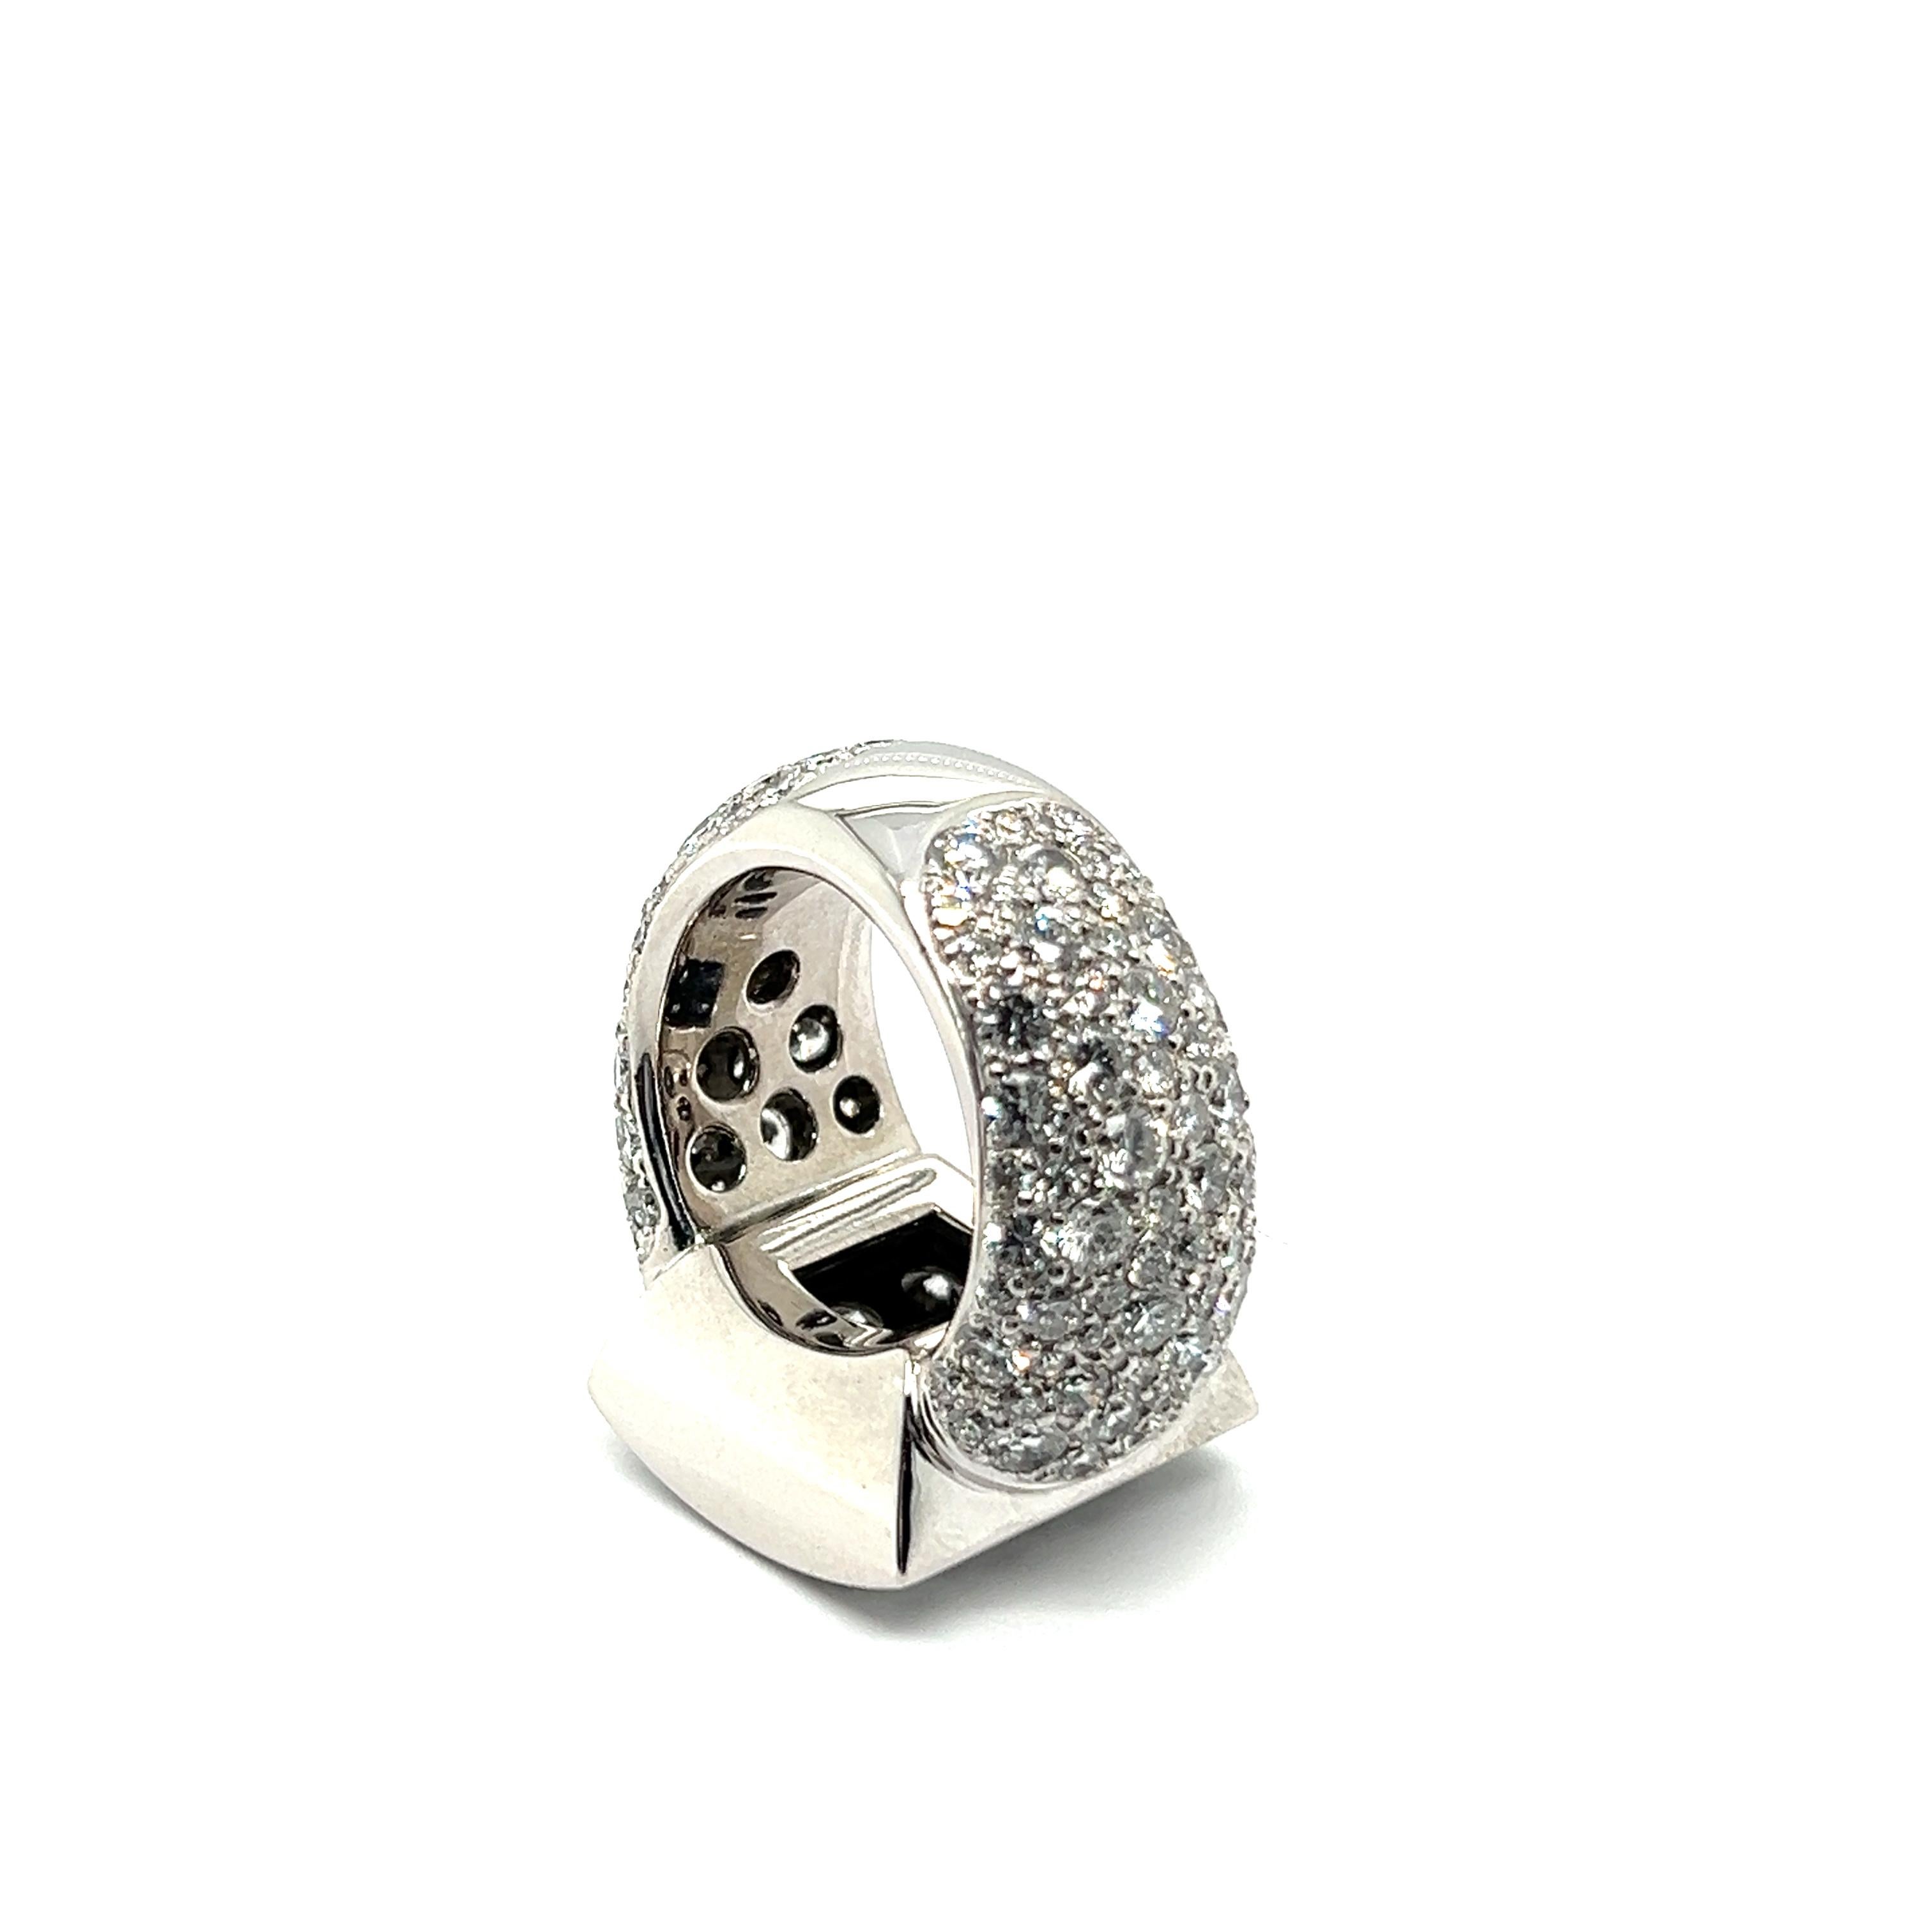 Bold Graphic Ring with Diamonds in 18 Karat White Gold by Majo Fruithof For Sale 6